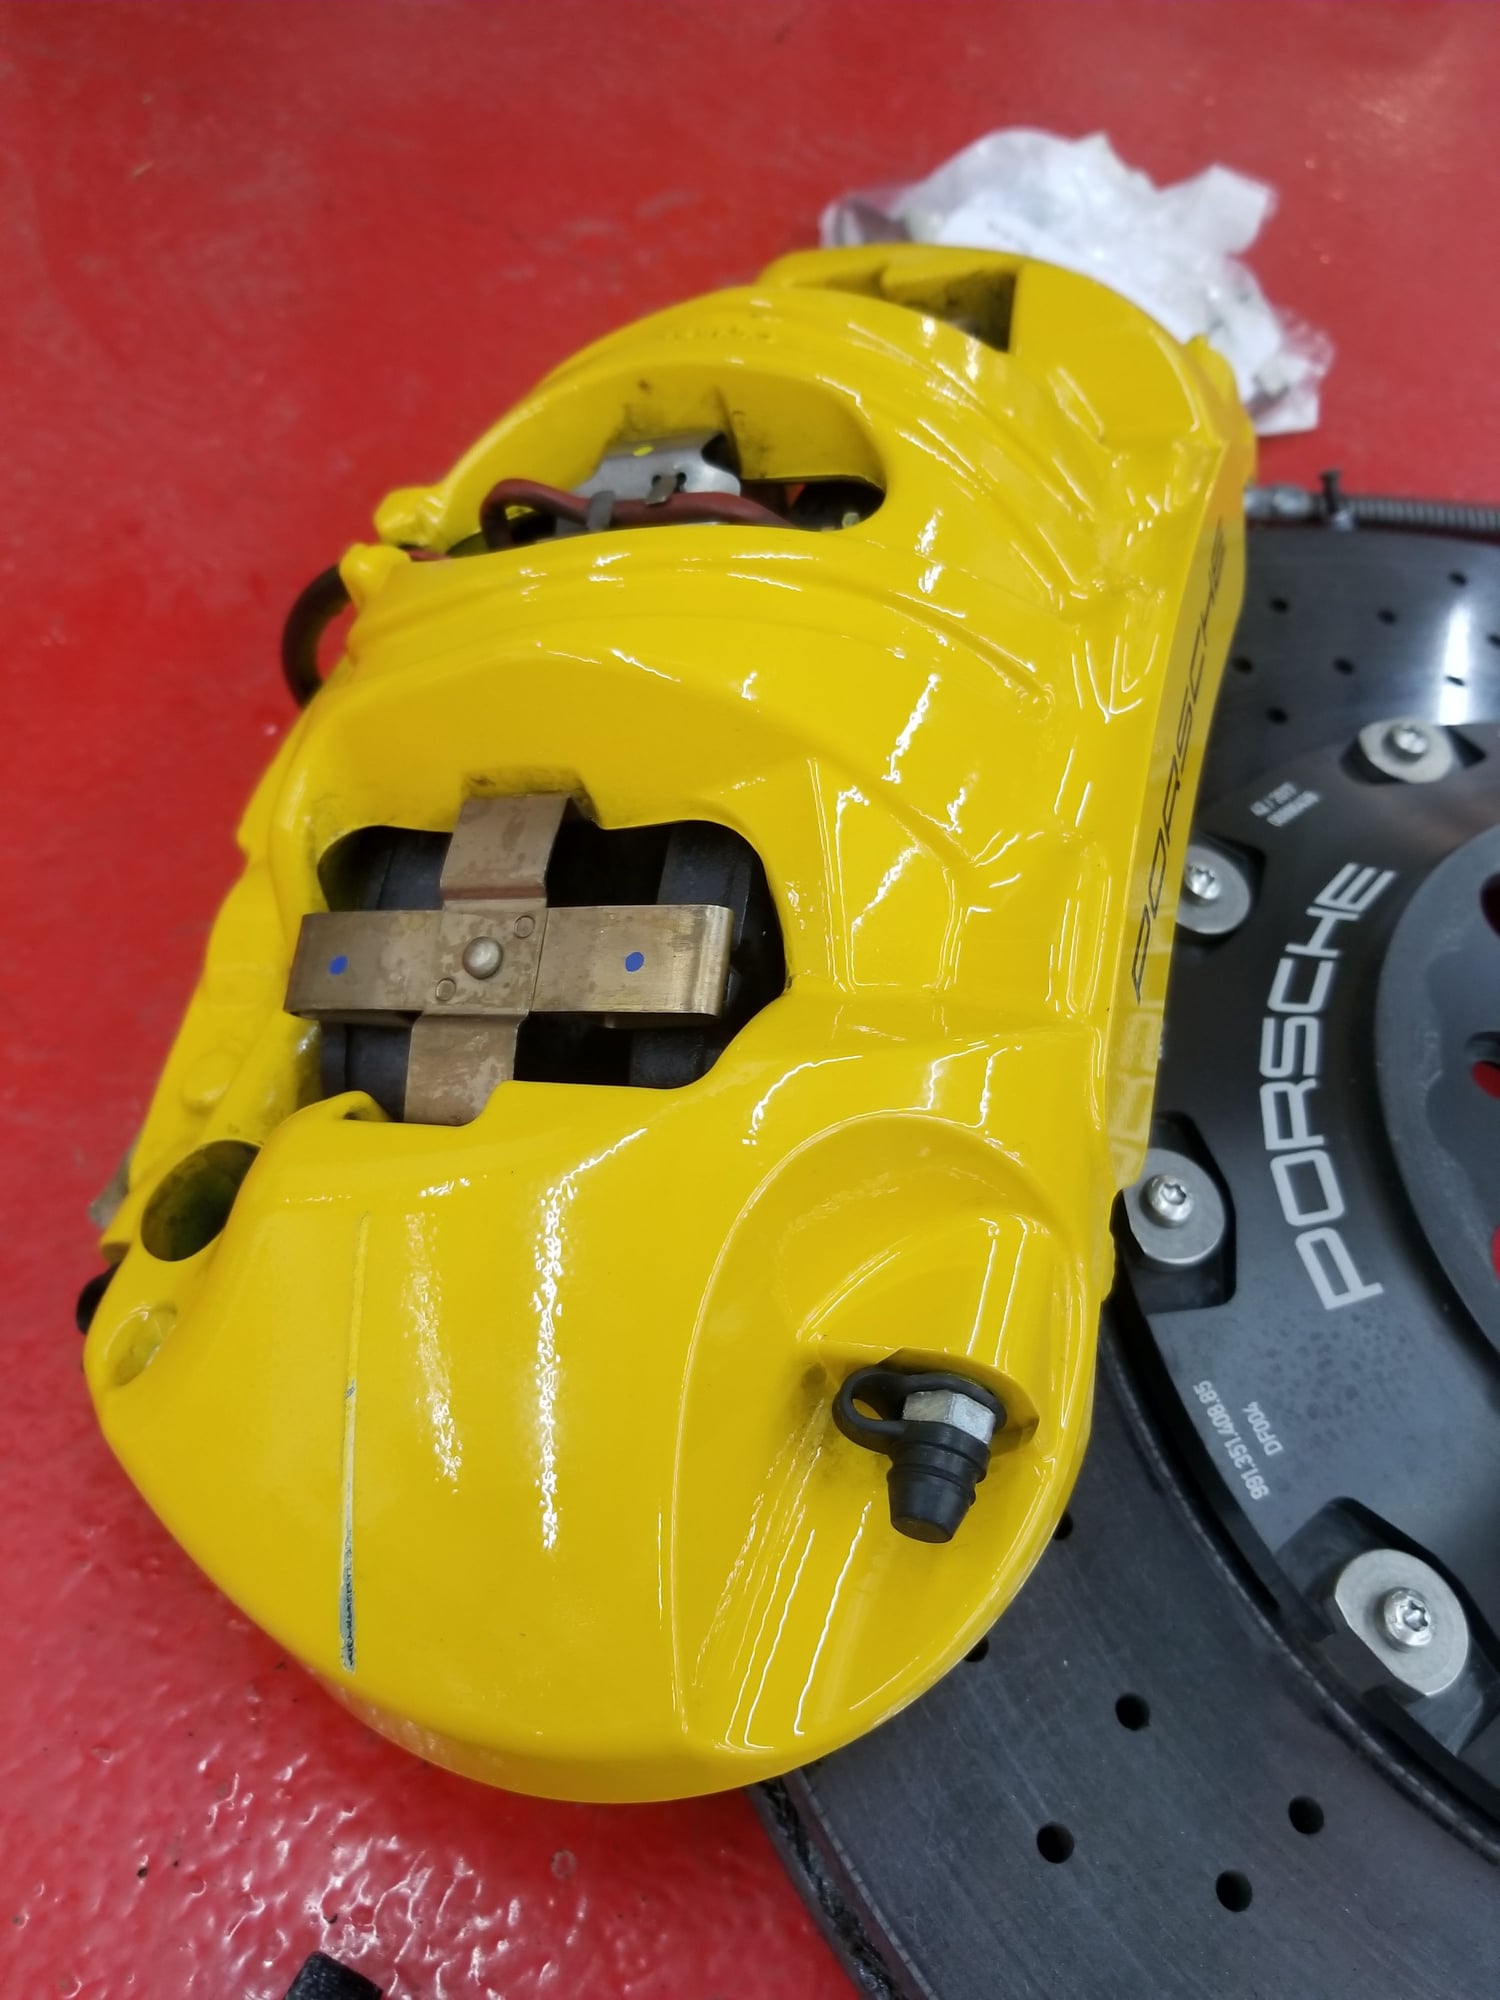 Brakes - Used 991.2 GT3 PCCB brakes and calipers - Used - 2014 to 2019 Porsche GT3 - Atlanta, GA 30309, United States